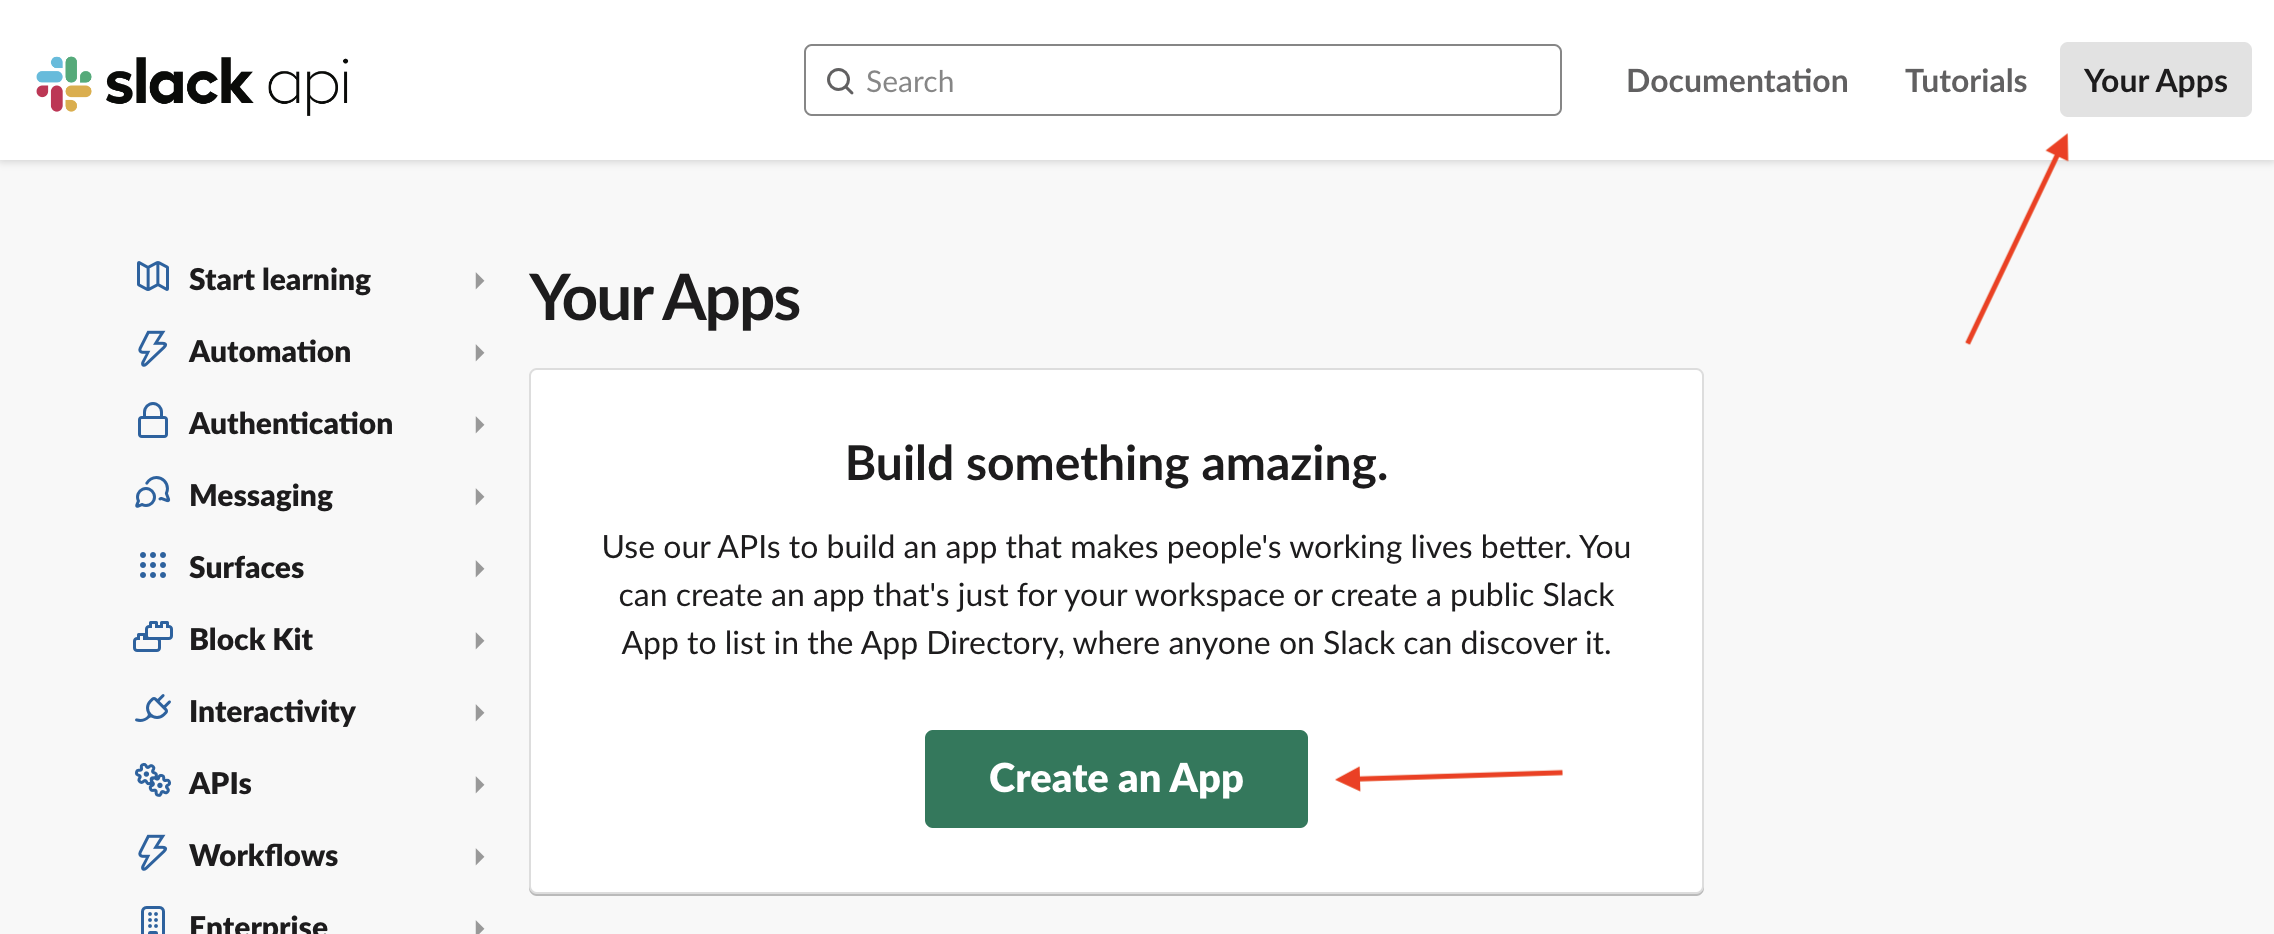 Screenshot of the slack api console applications page wirth an arrow pointing to the create an app button